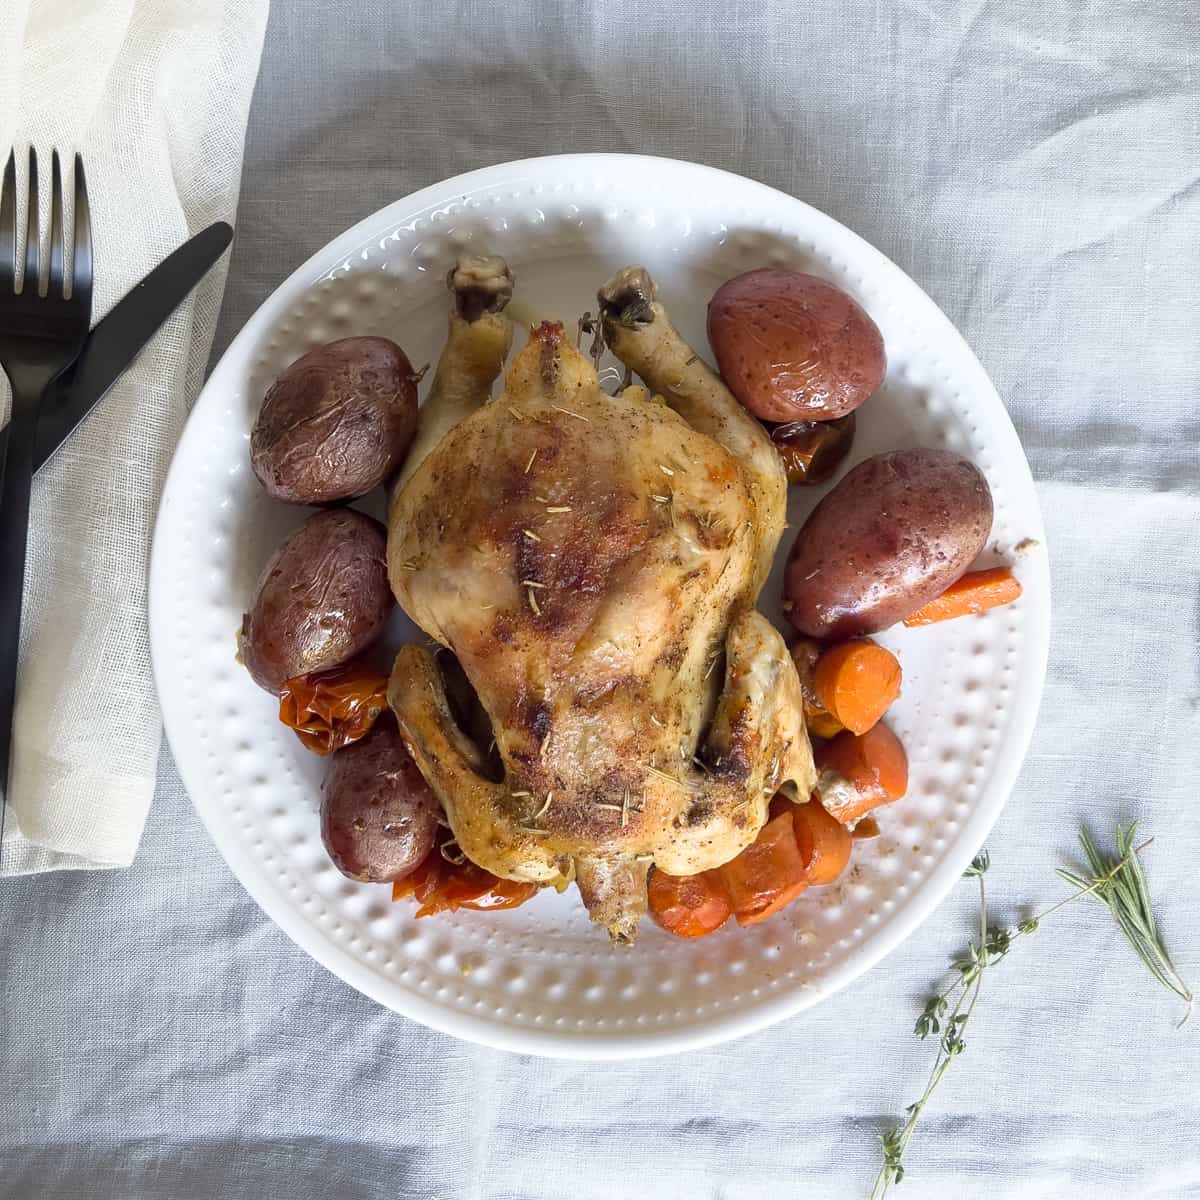 Roasted cornish hen on white plate with potatoes and carrots.